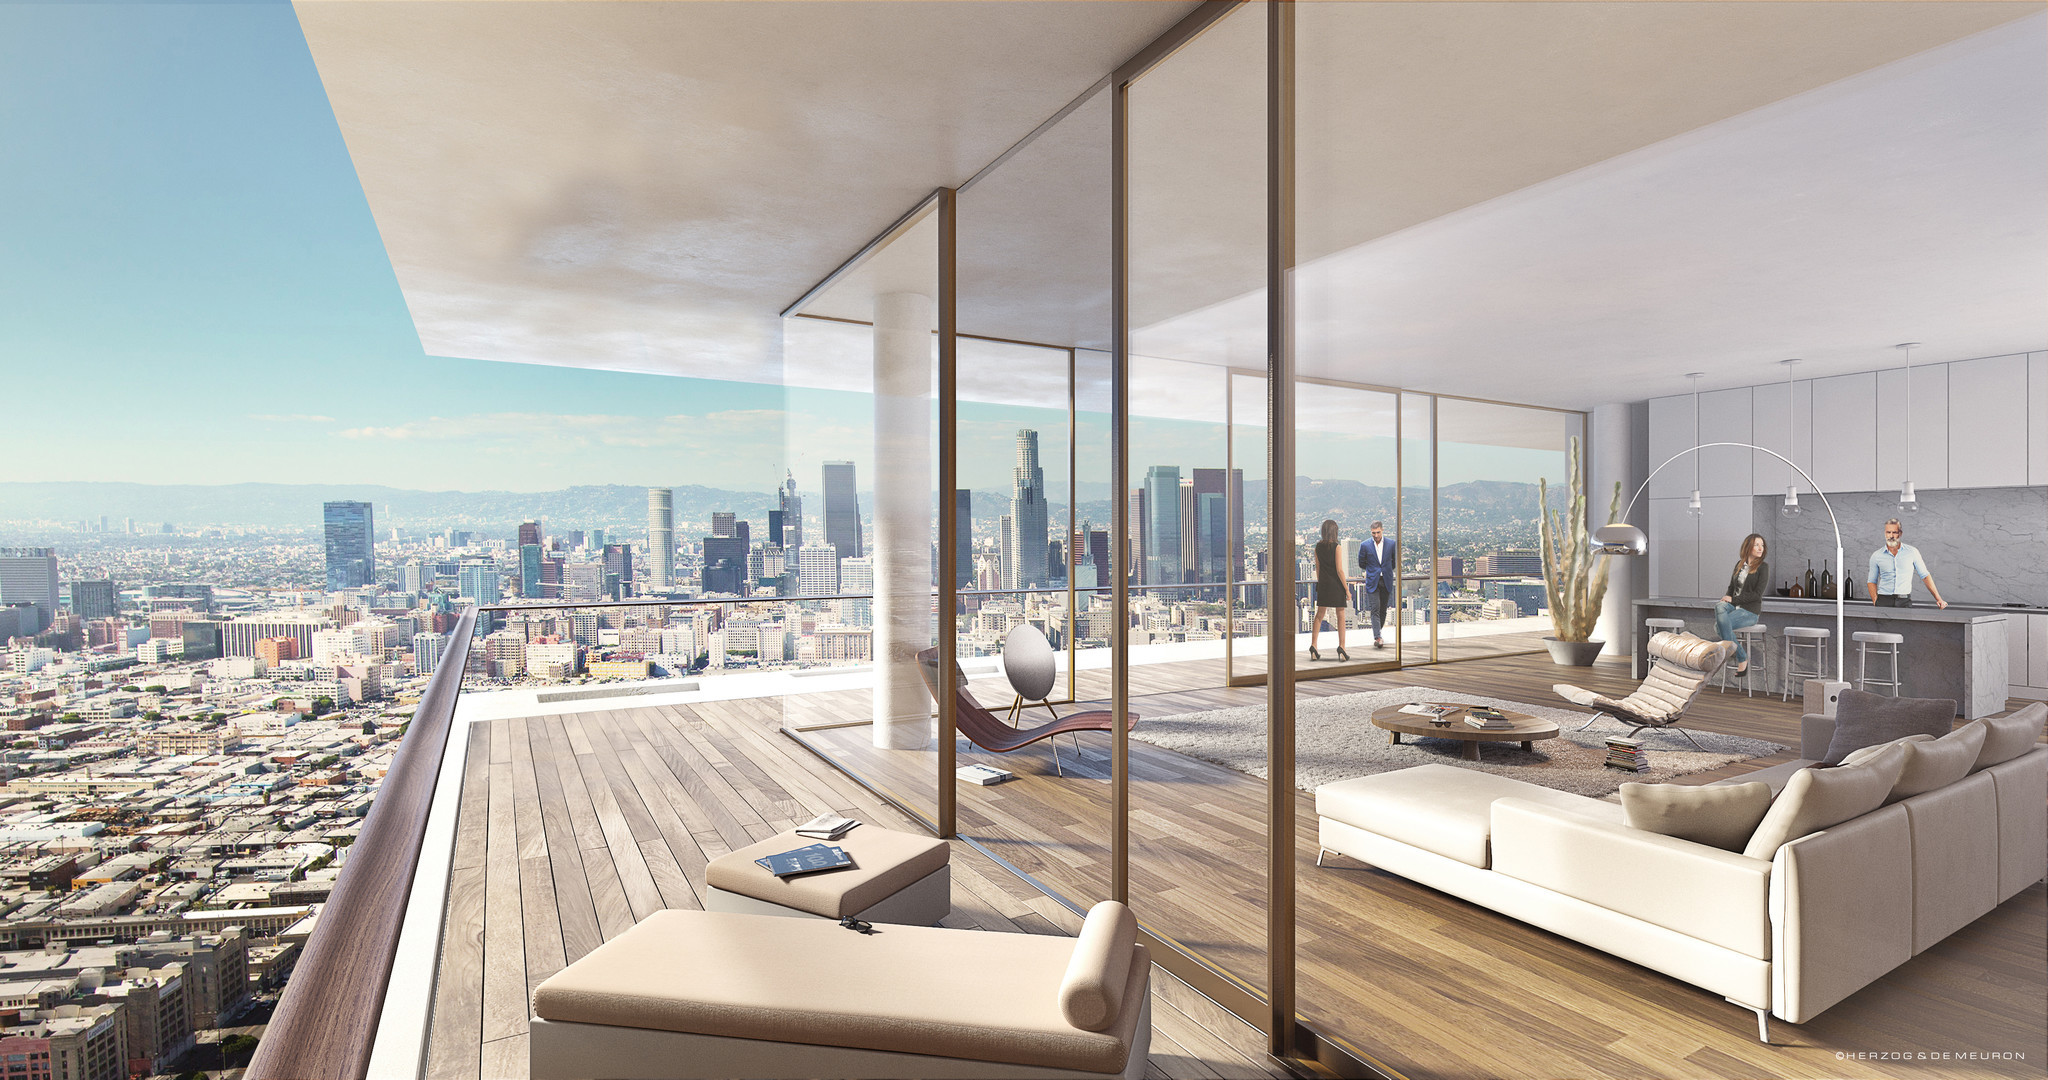 Rendering of the 6AM project with view pointed toward the downtown L.A. skyline.